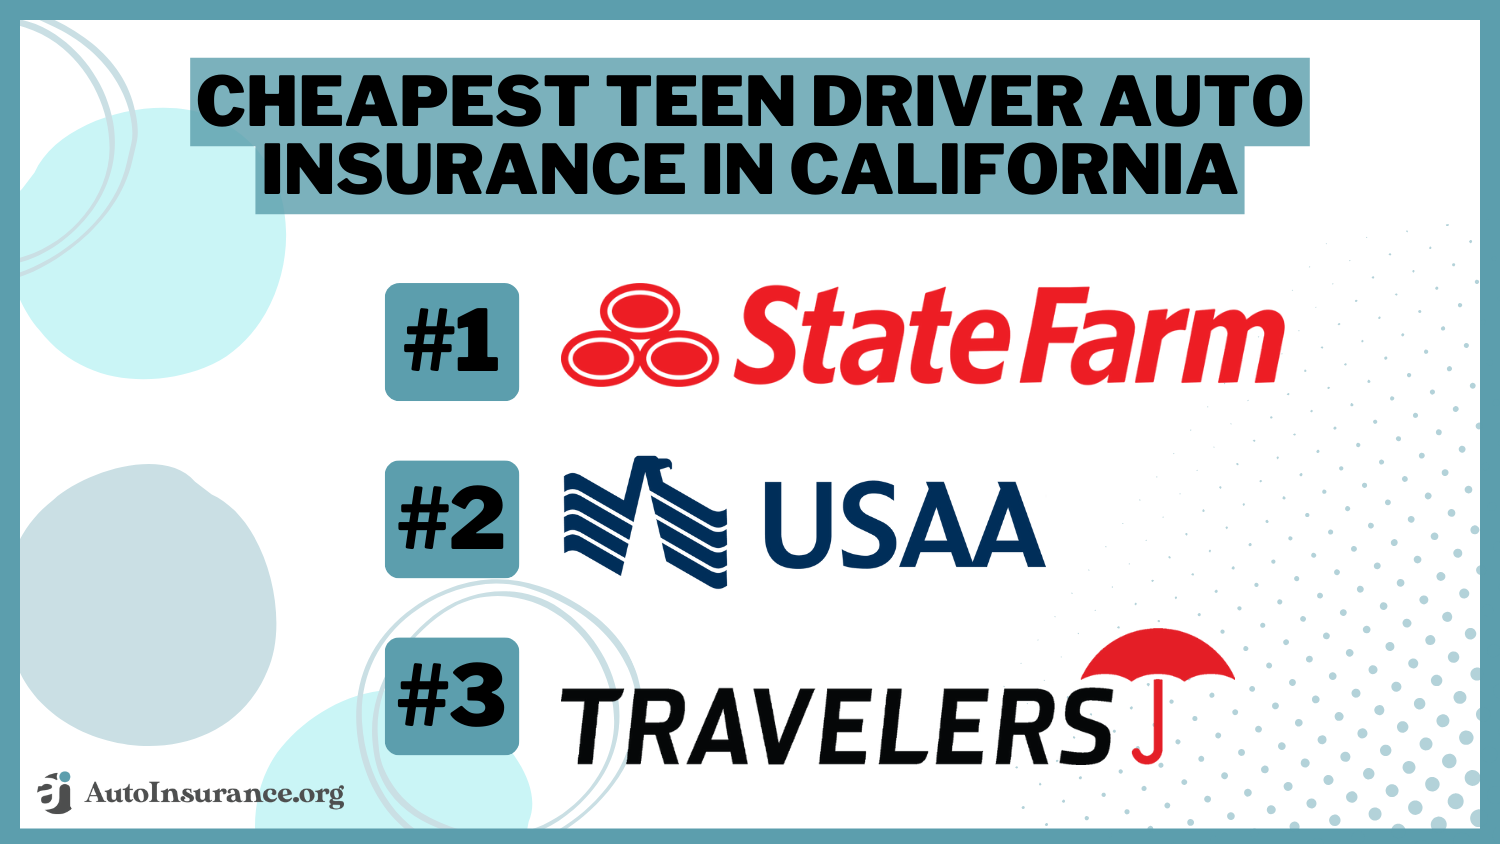 Cheapest Teen Driver Auto Insurance In California - State Farm, USAA, Travelers